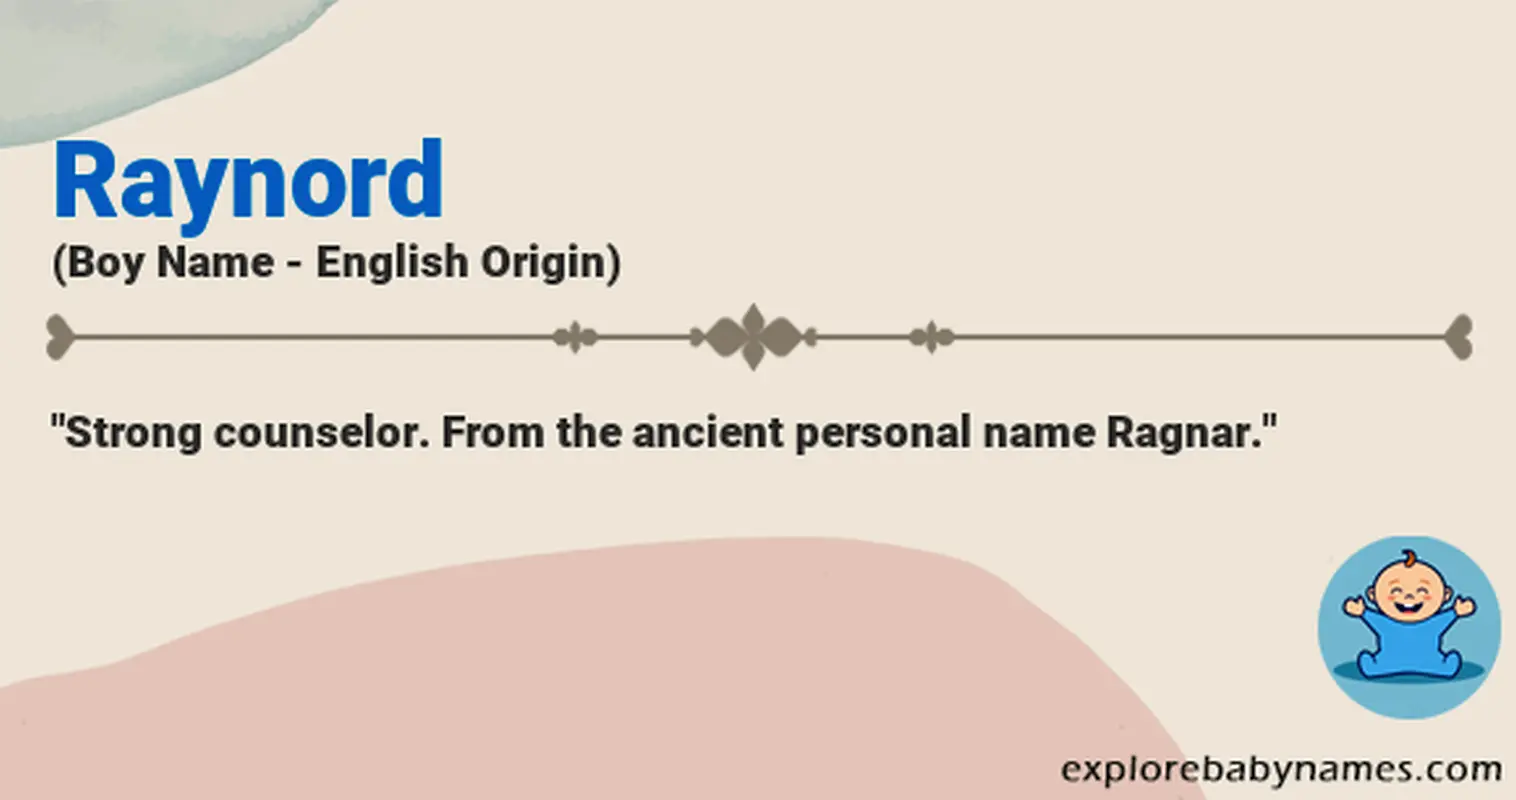 Meaning of Raynord